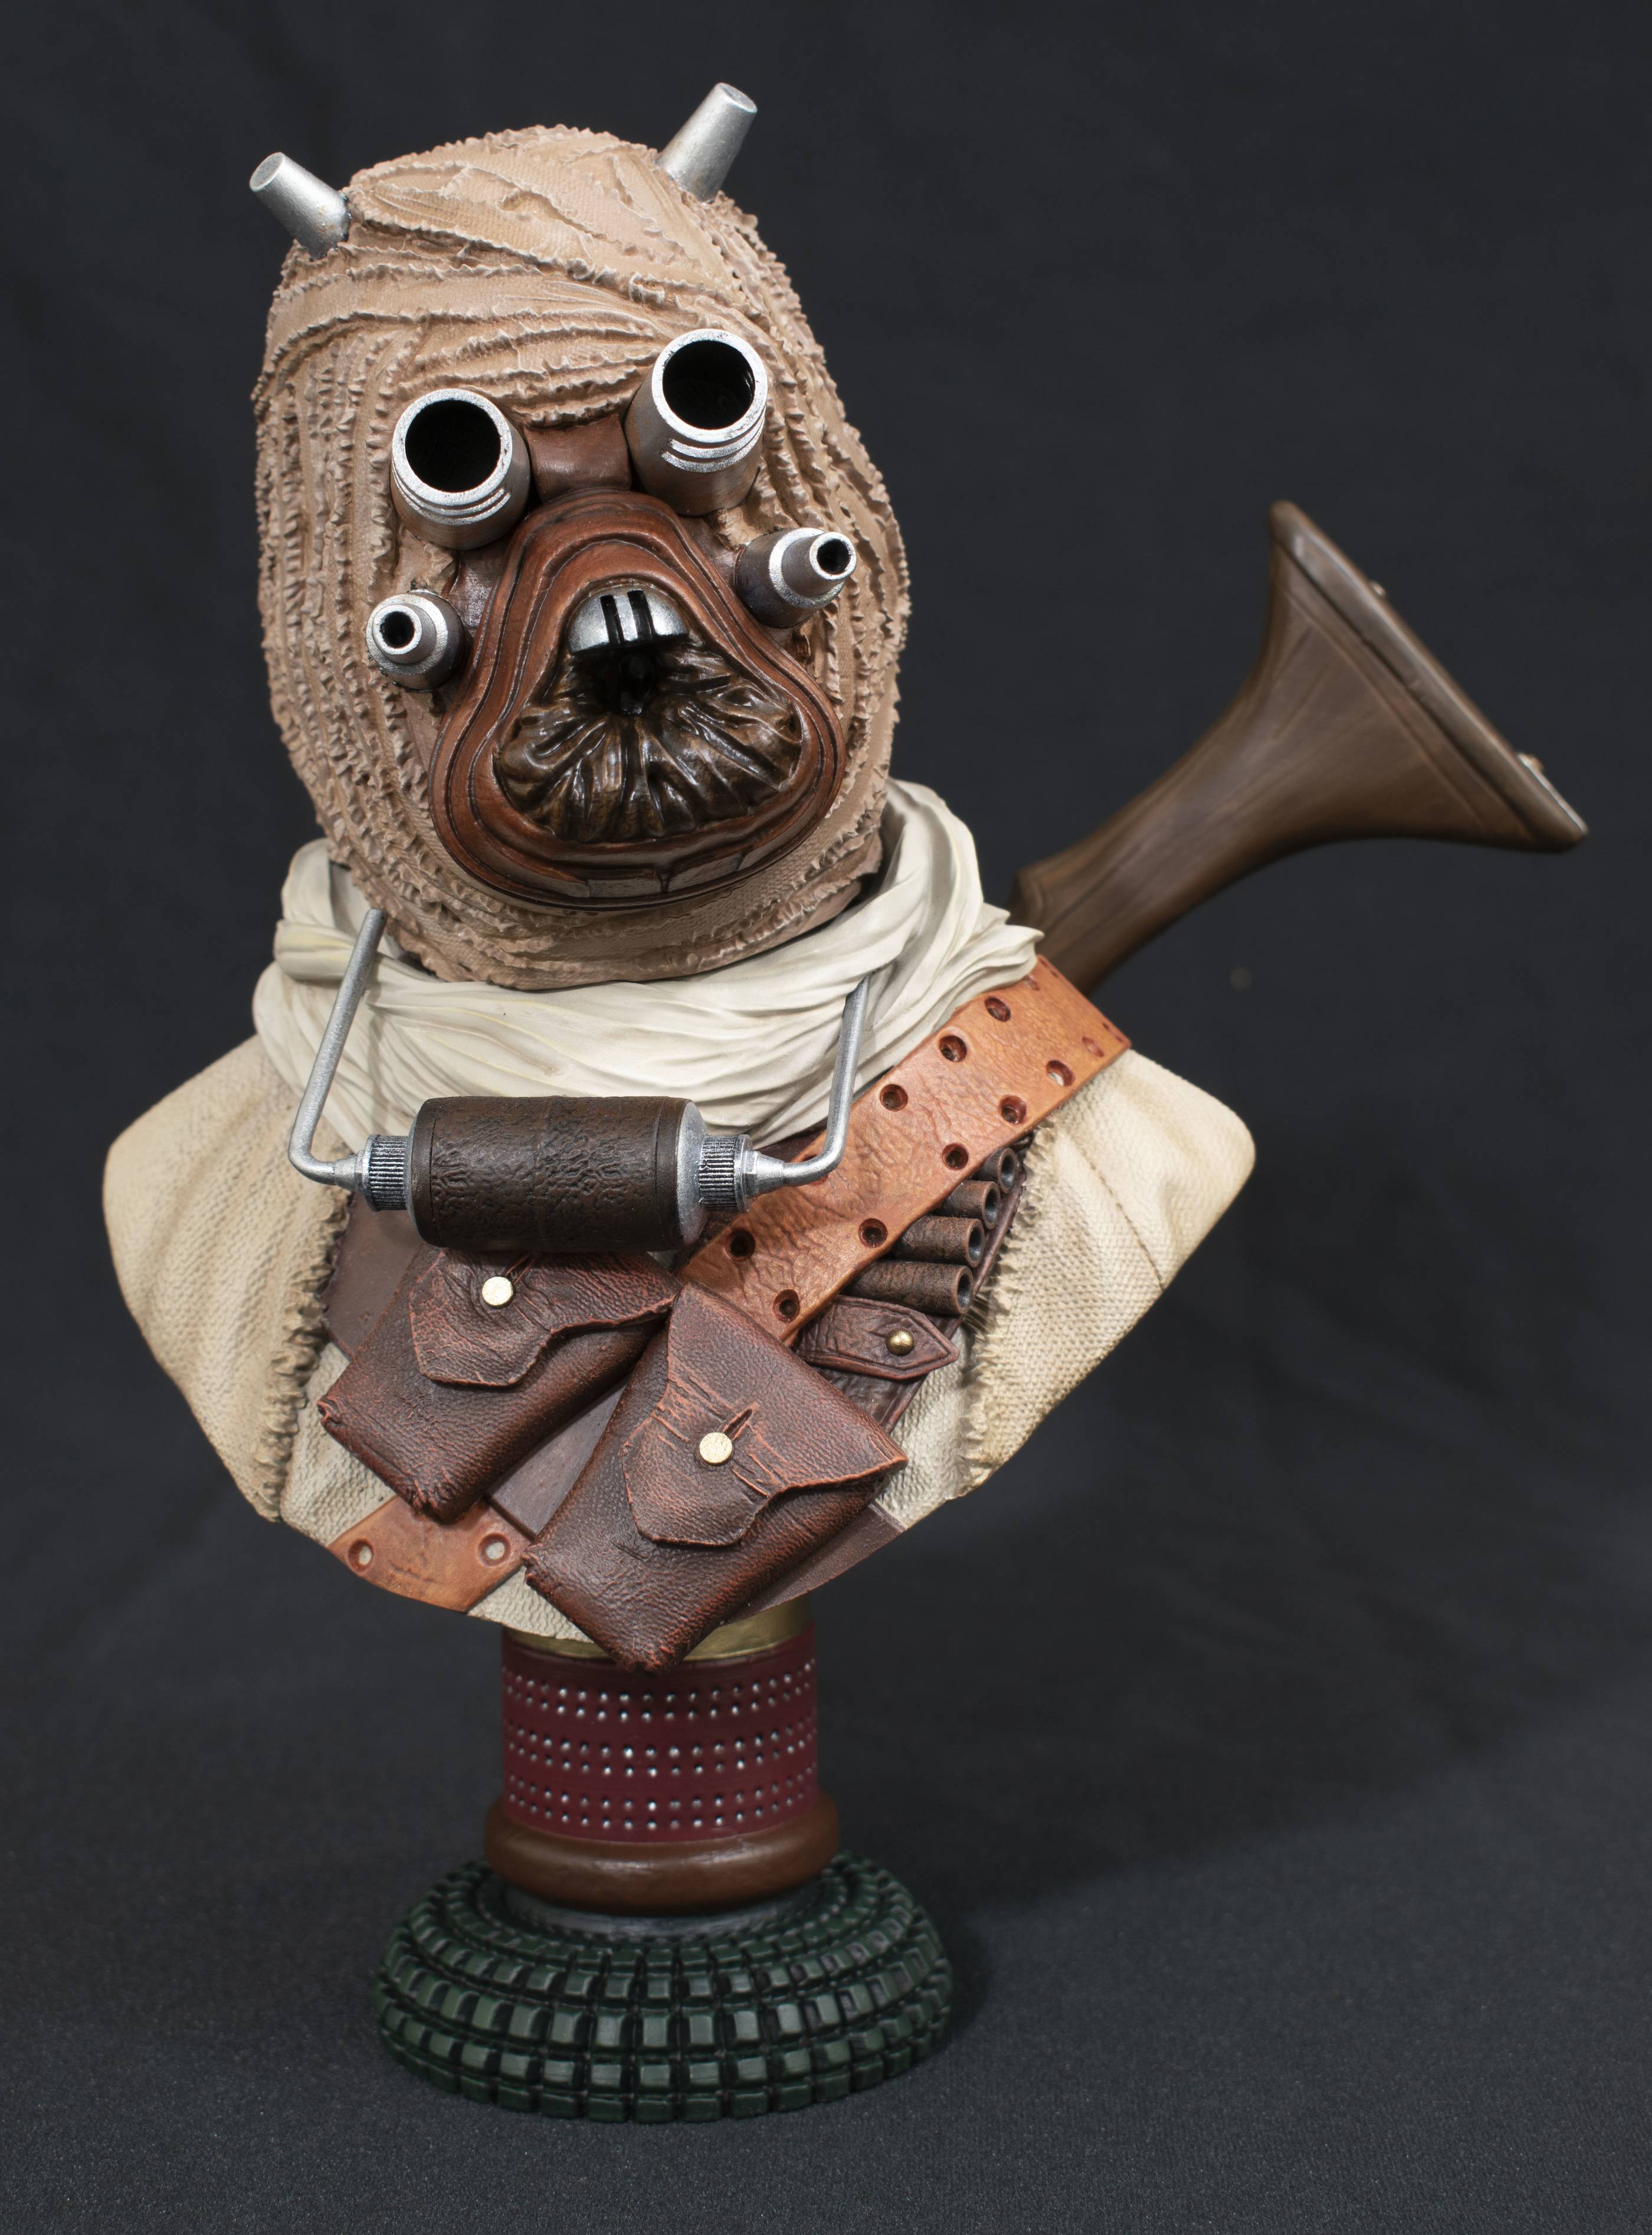 STAR WARS L3D A NEW HOPE TUSKEN RAIDER 1/2 SCALE BUST